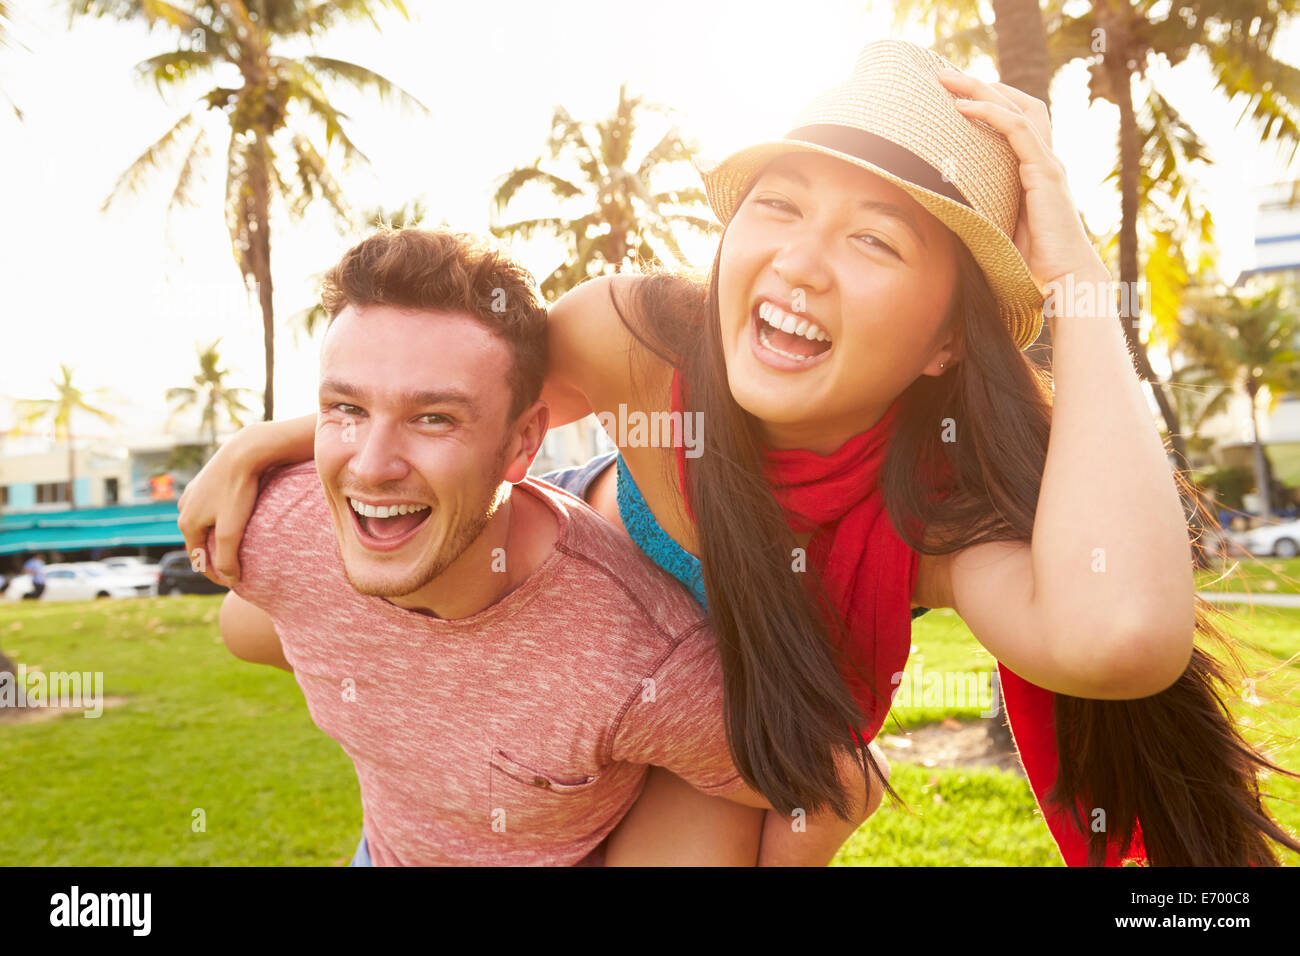 Young Couple Having Fun In Park Together Stock Photo